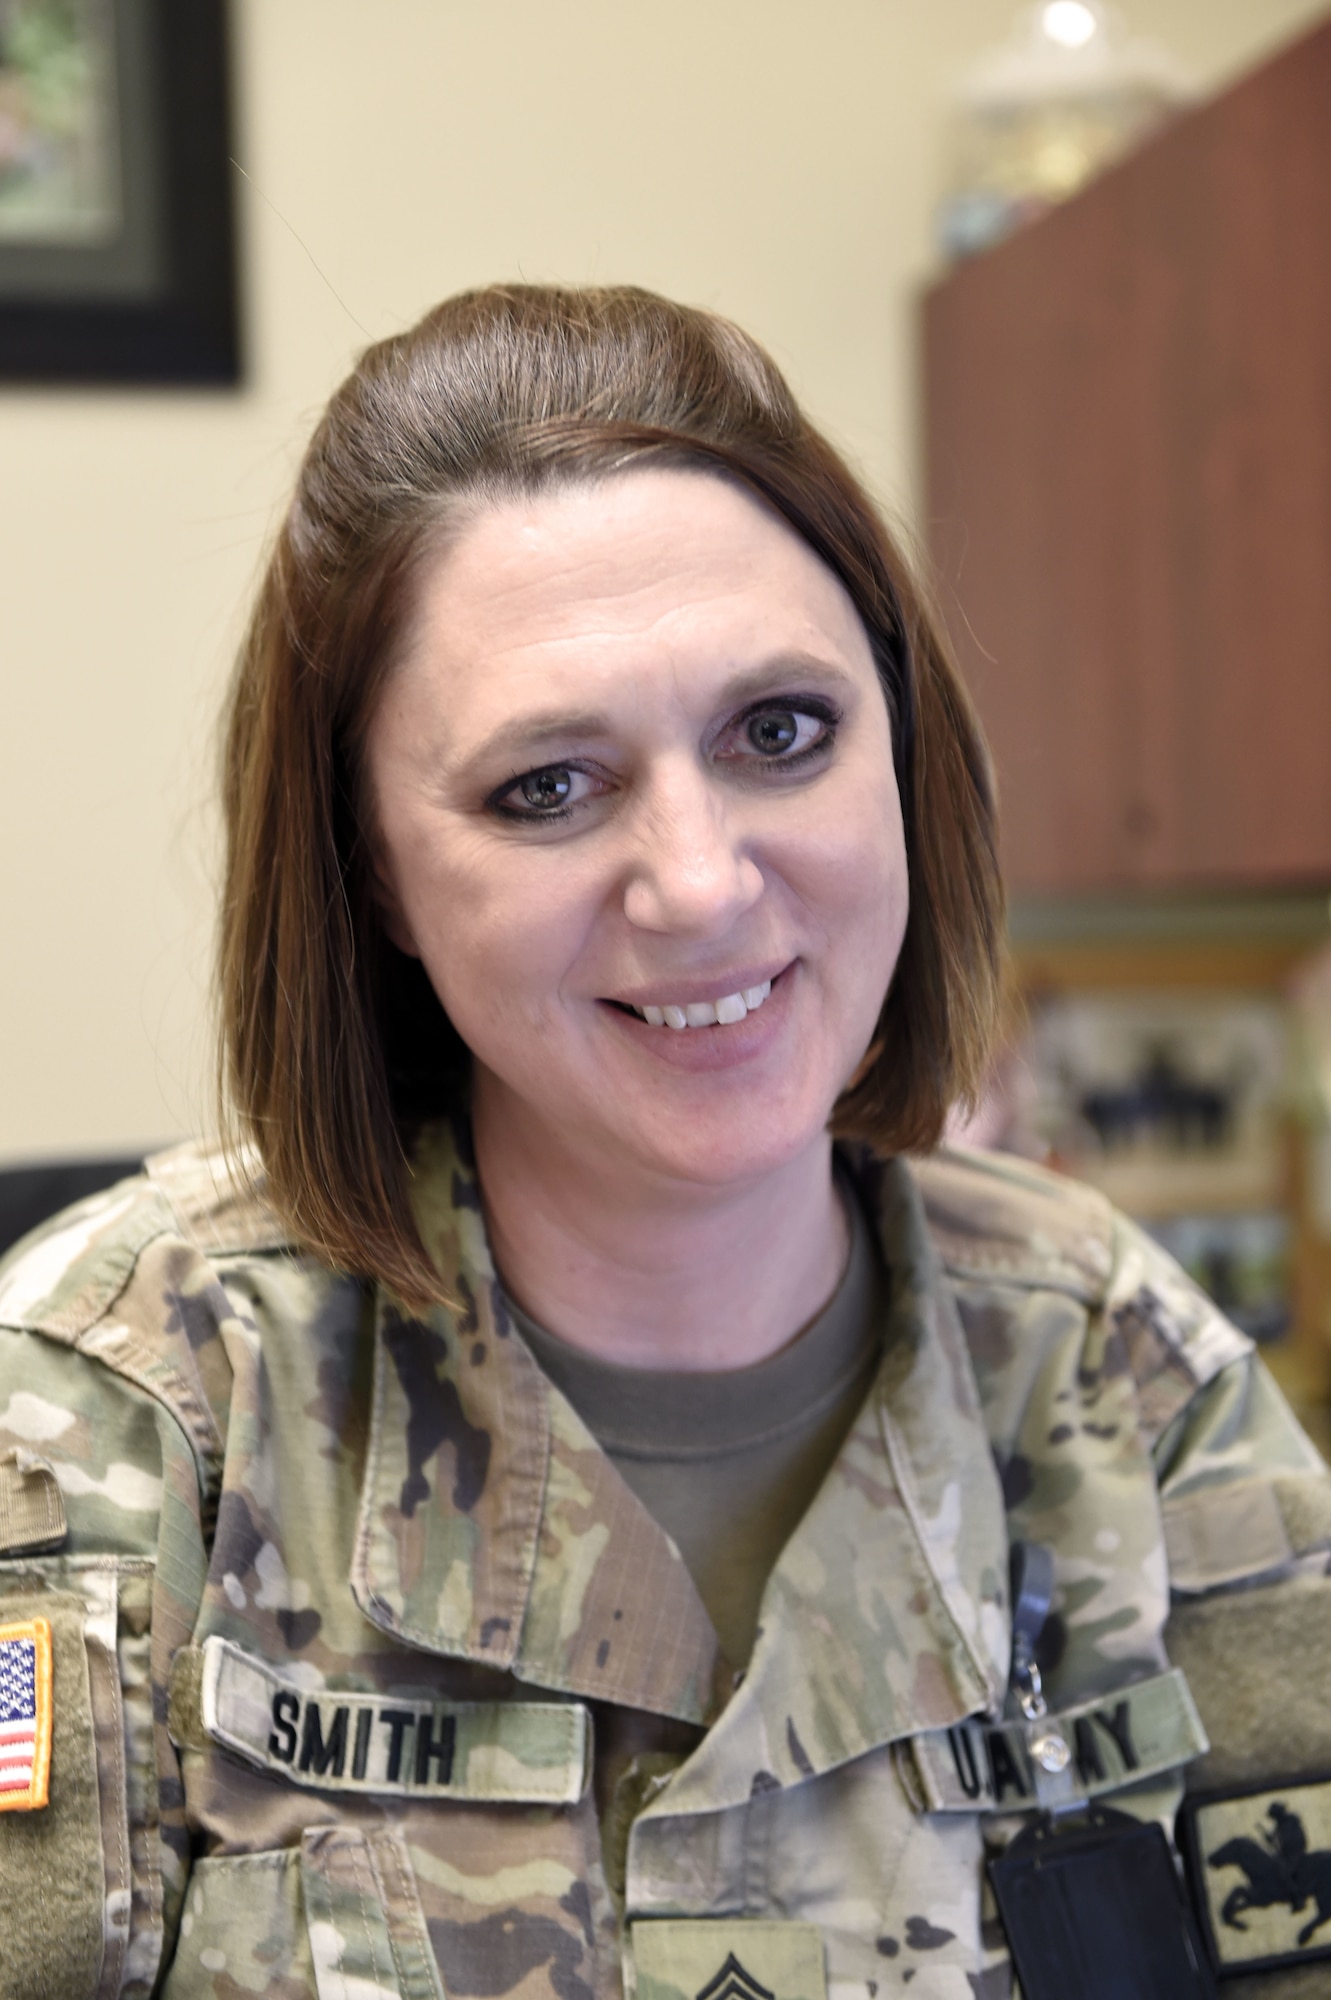 Wyoming Army National Guard 1st Sgt. Diane Smith, the coordinator of the Wyoming Counterdrug Program.